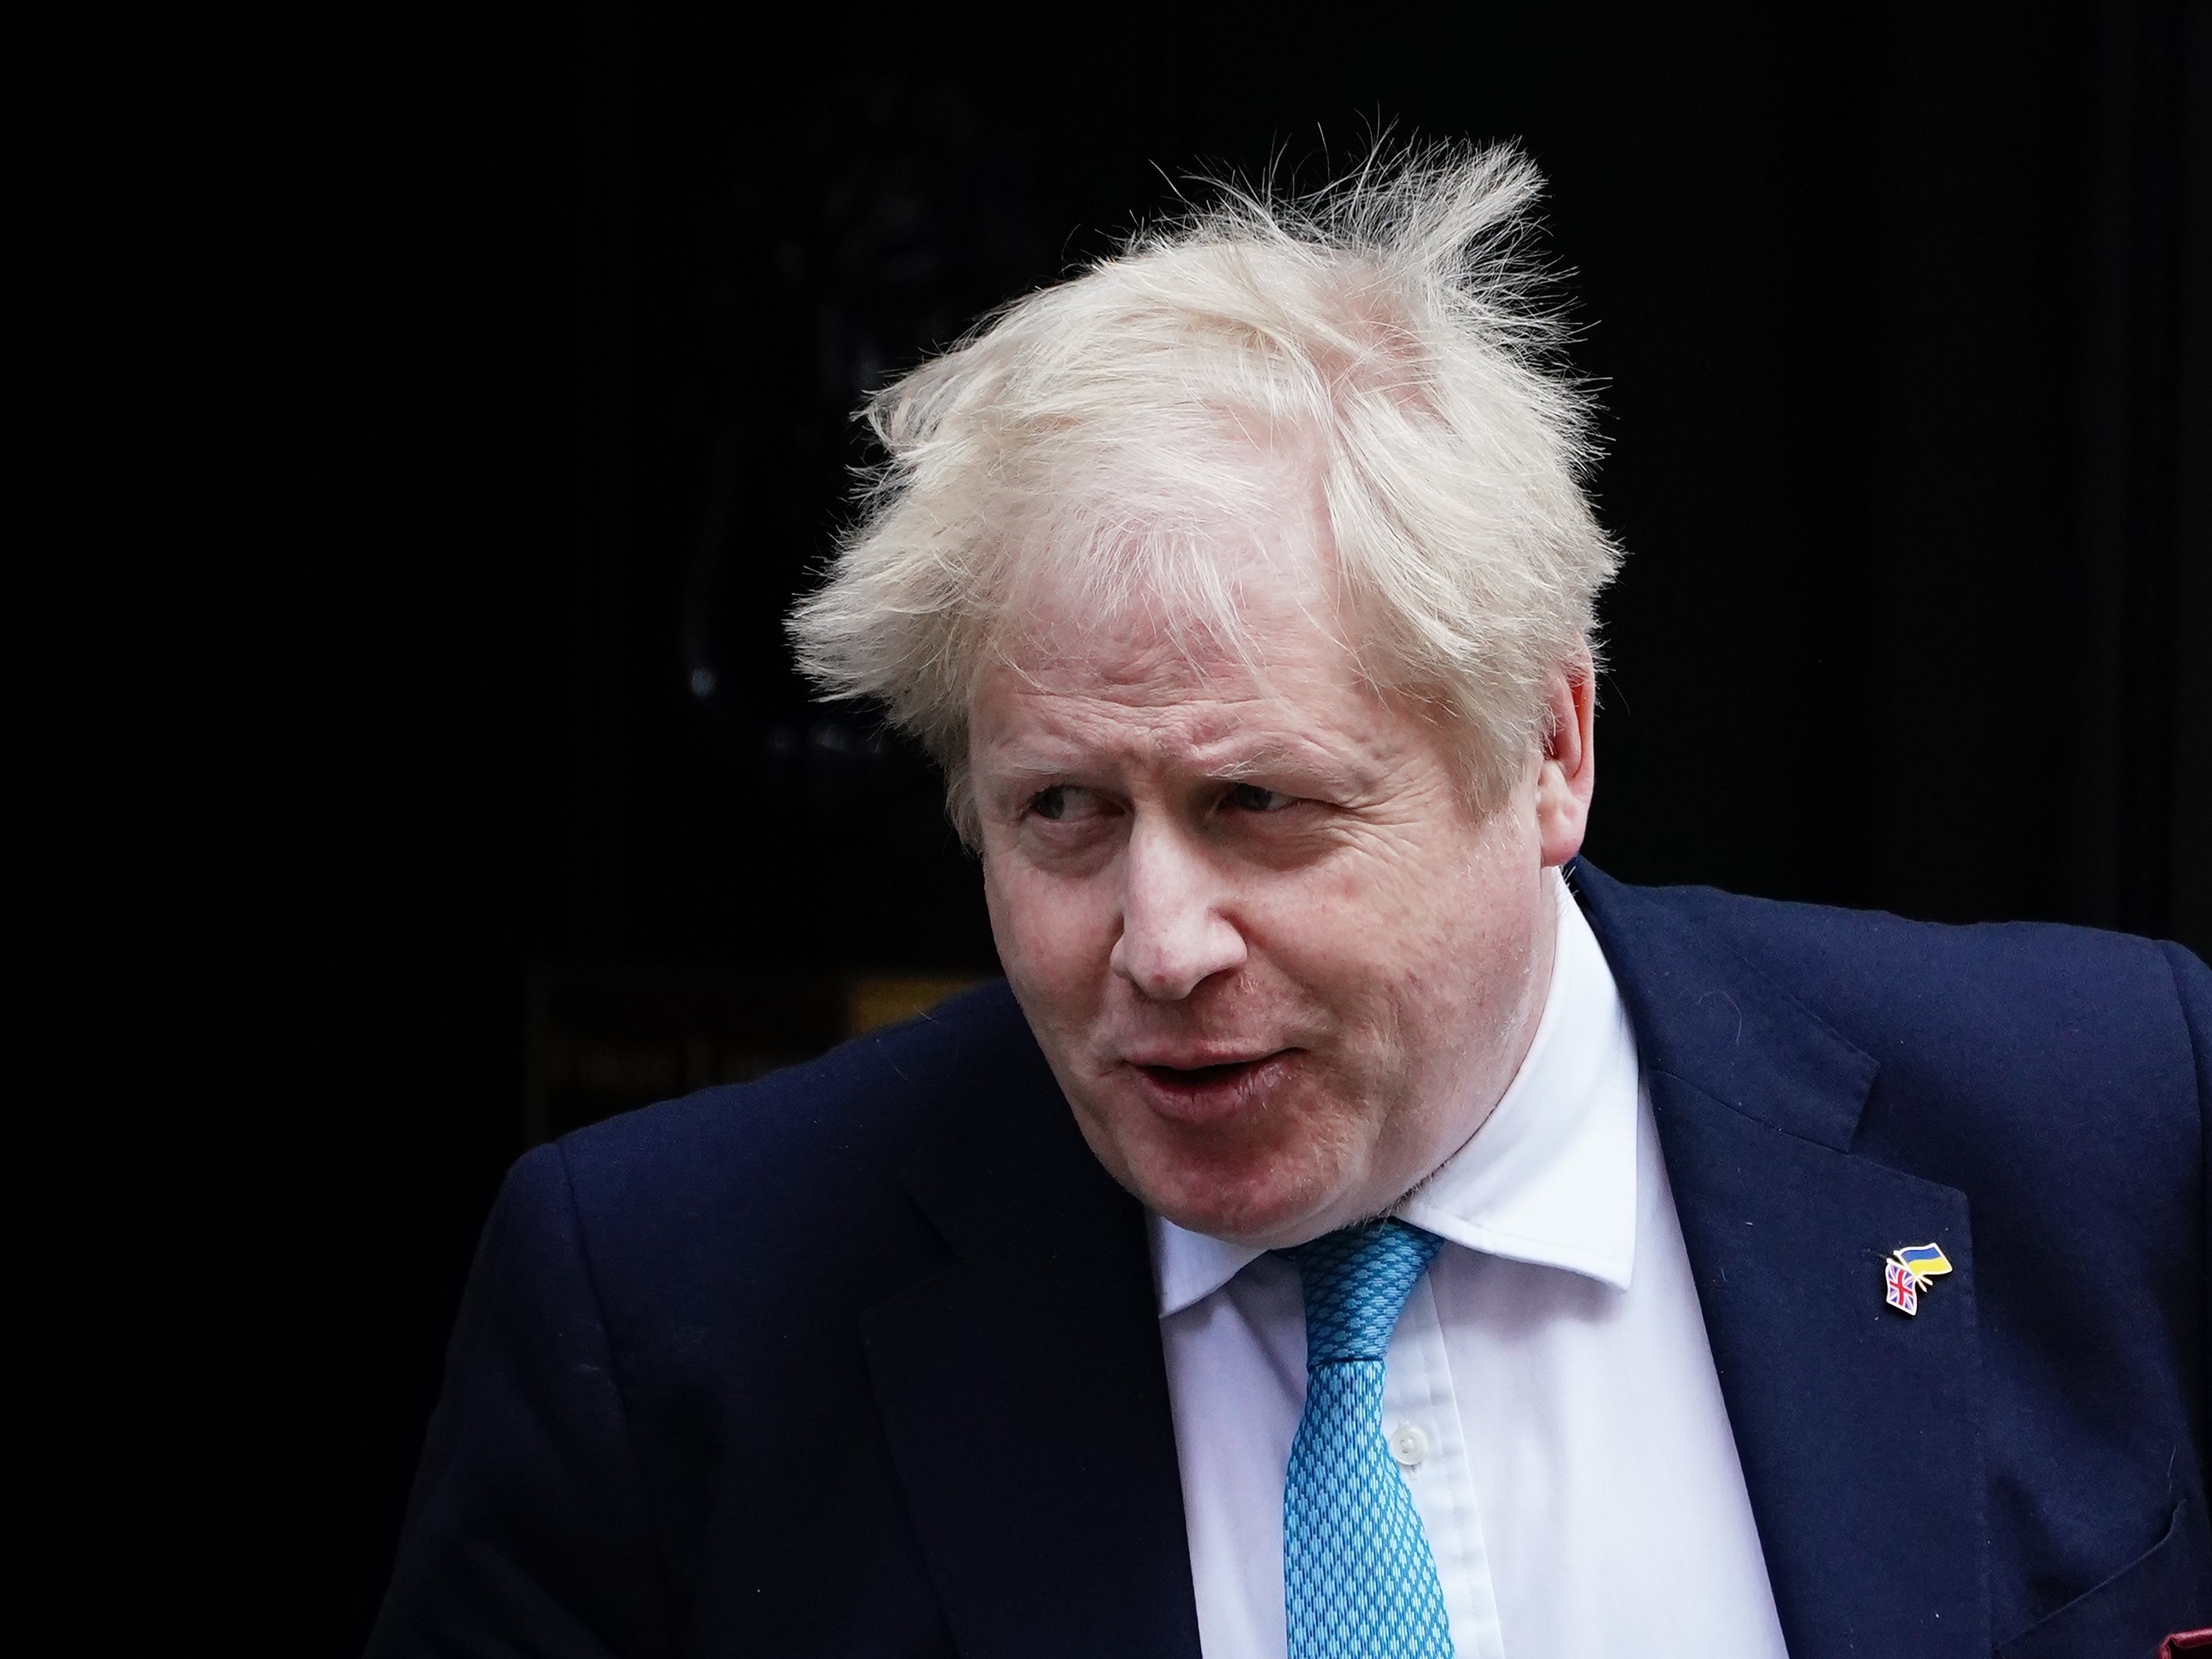 Boris Johnson leaves 10 Downing Street to attend Prime Minister’s Questions at the Houses of Parliament (Aaron Chown/PA)